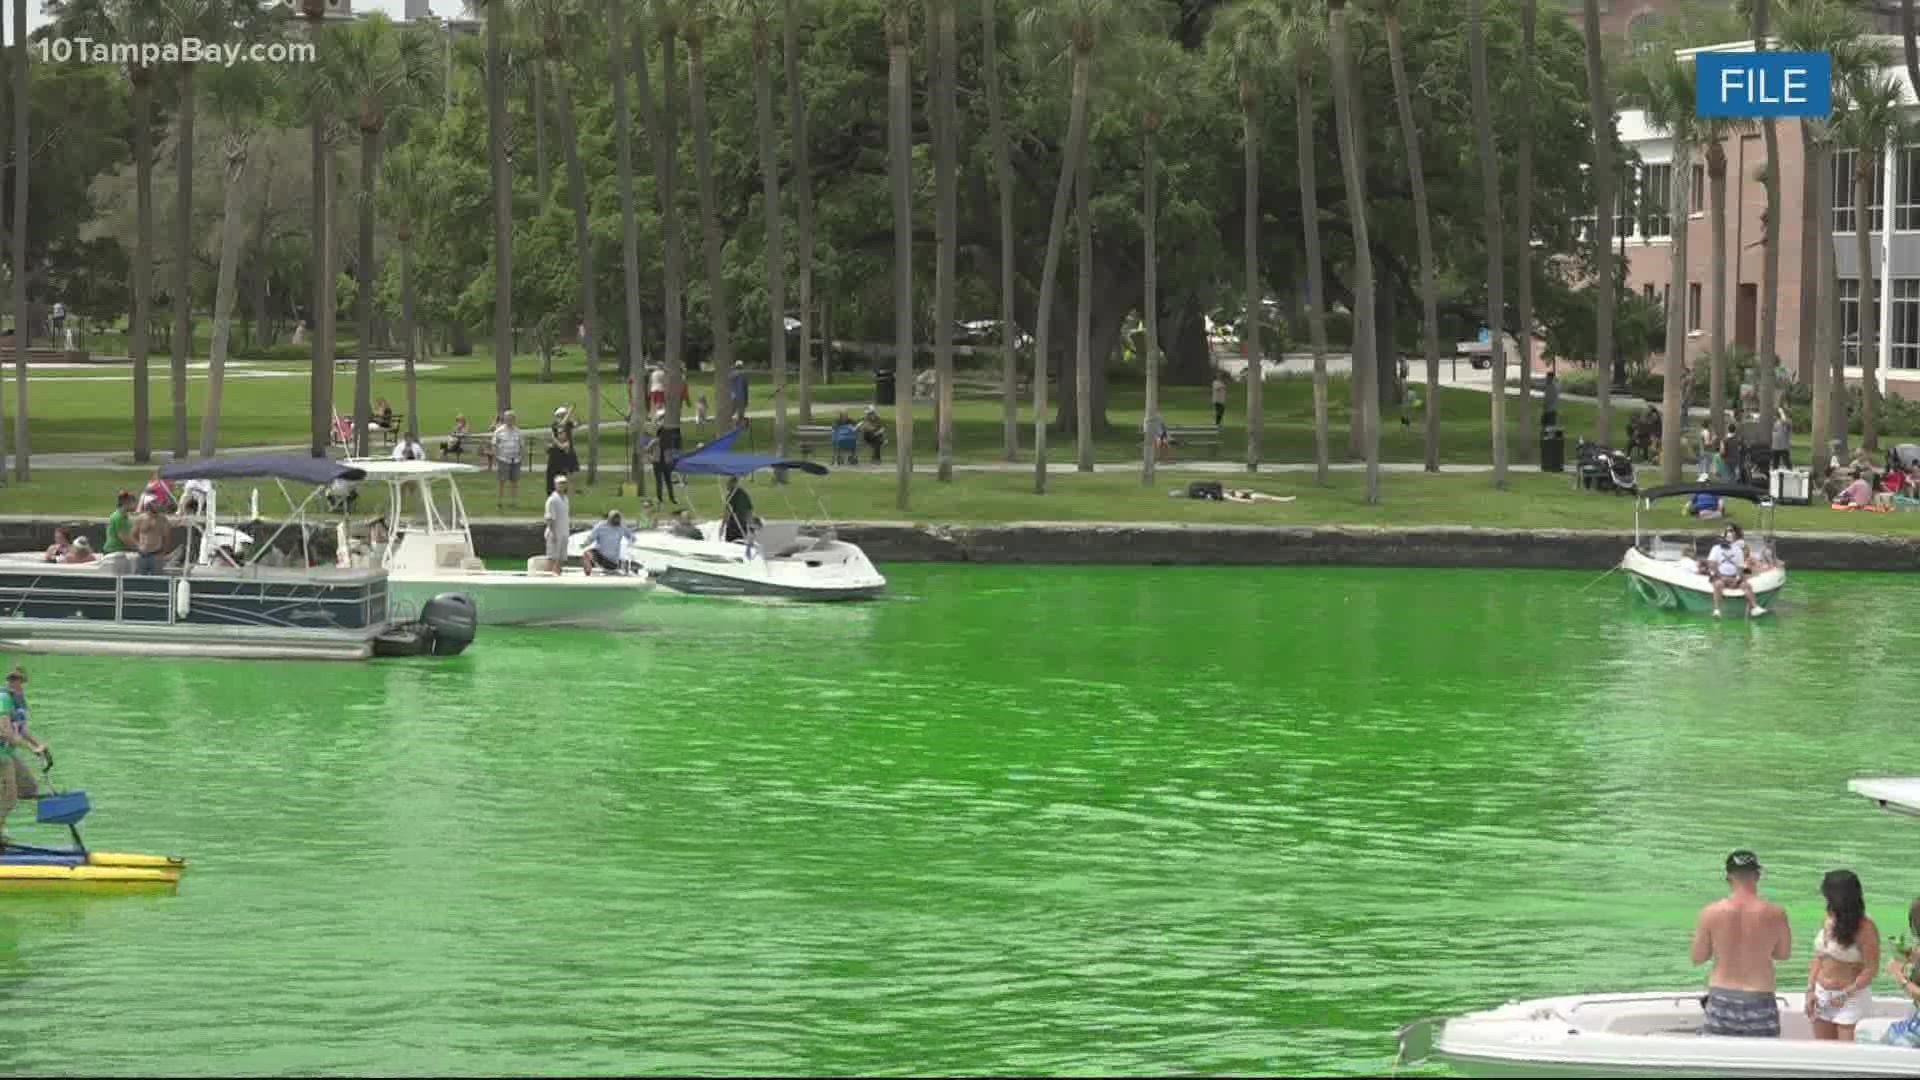 The long-awaited event will now kick-off at 11 a.m. Sunday with the Hillsborough River transforming into a bright shade of green.